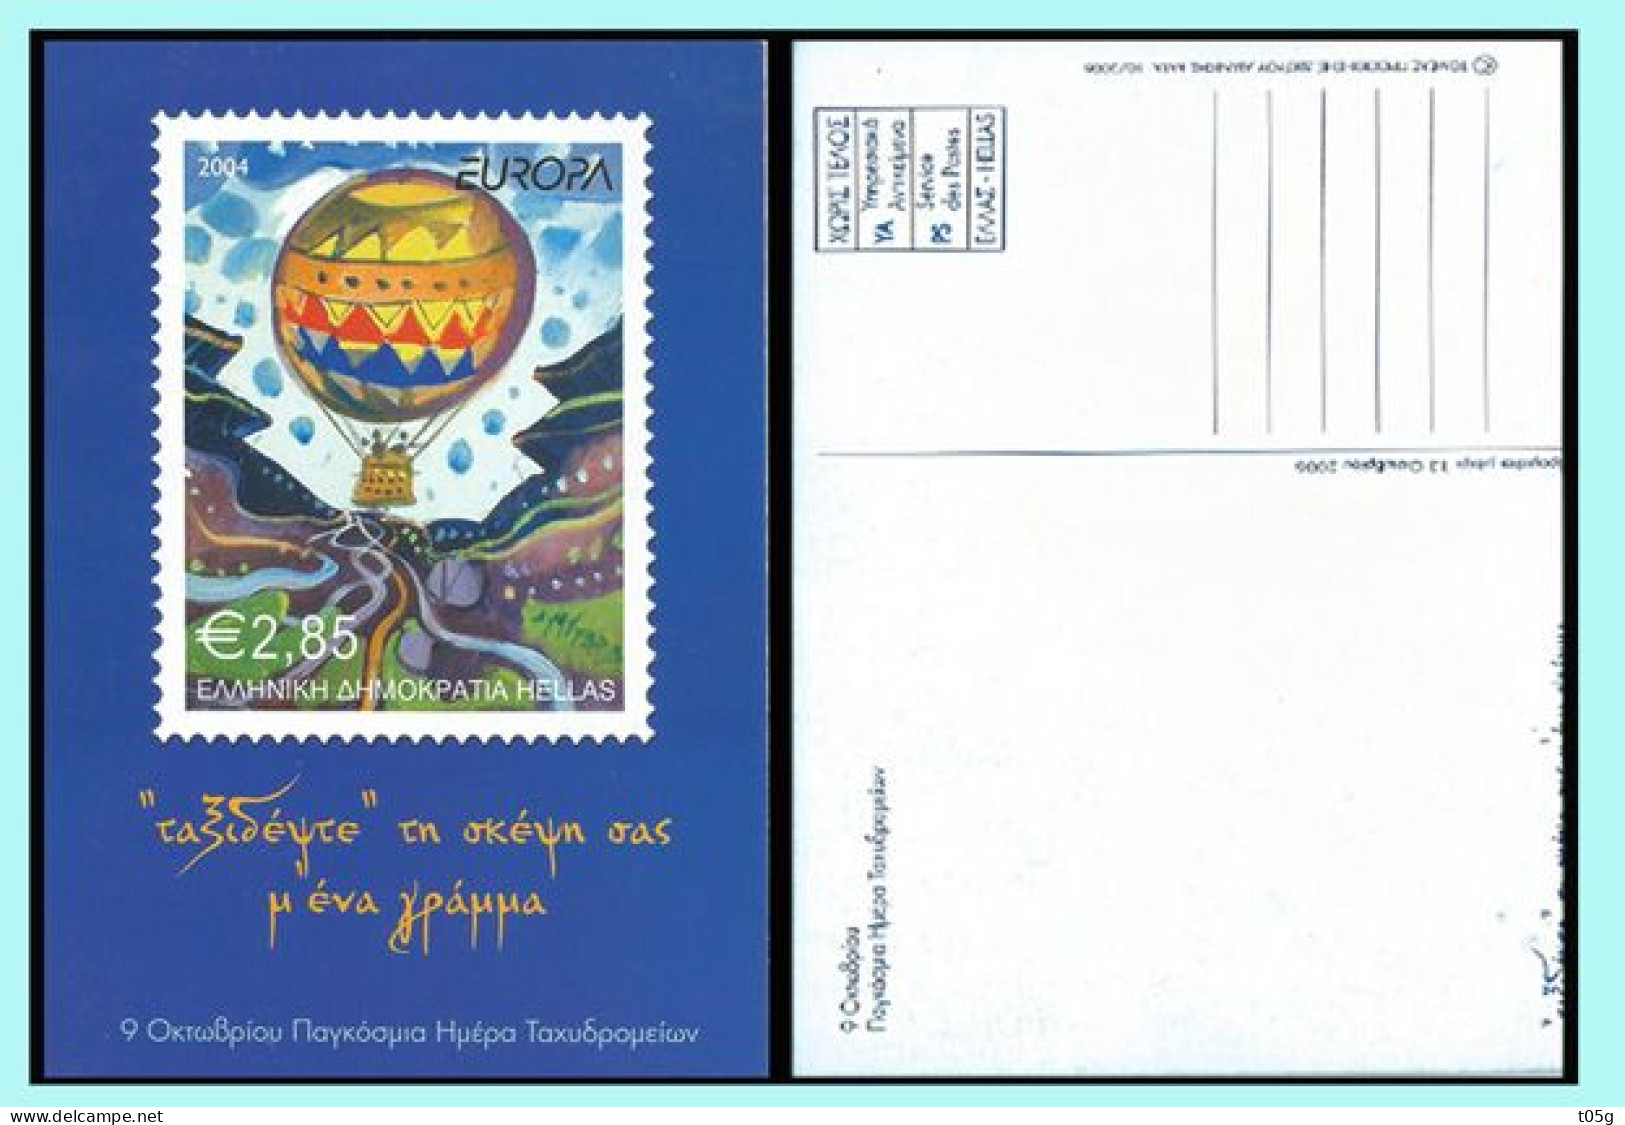 GREECE- GRECE  - HELLAS- EUROPA  2004: Publisher GREEK Post Office "ELTA" For The Global Day Of Postal Workers - Unused Stamps